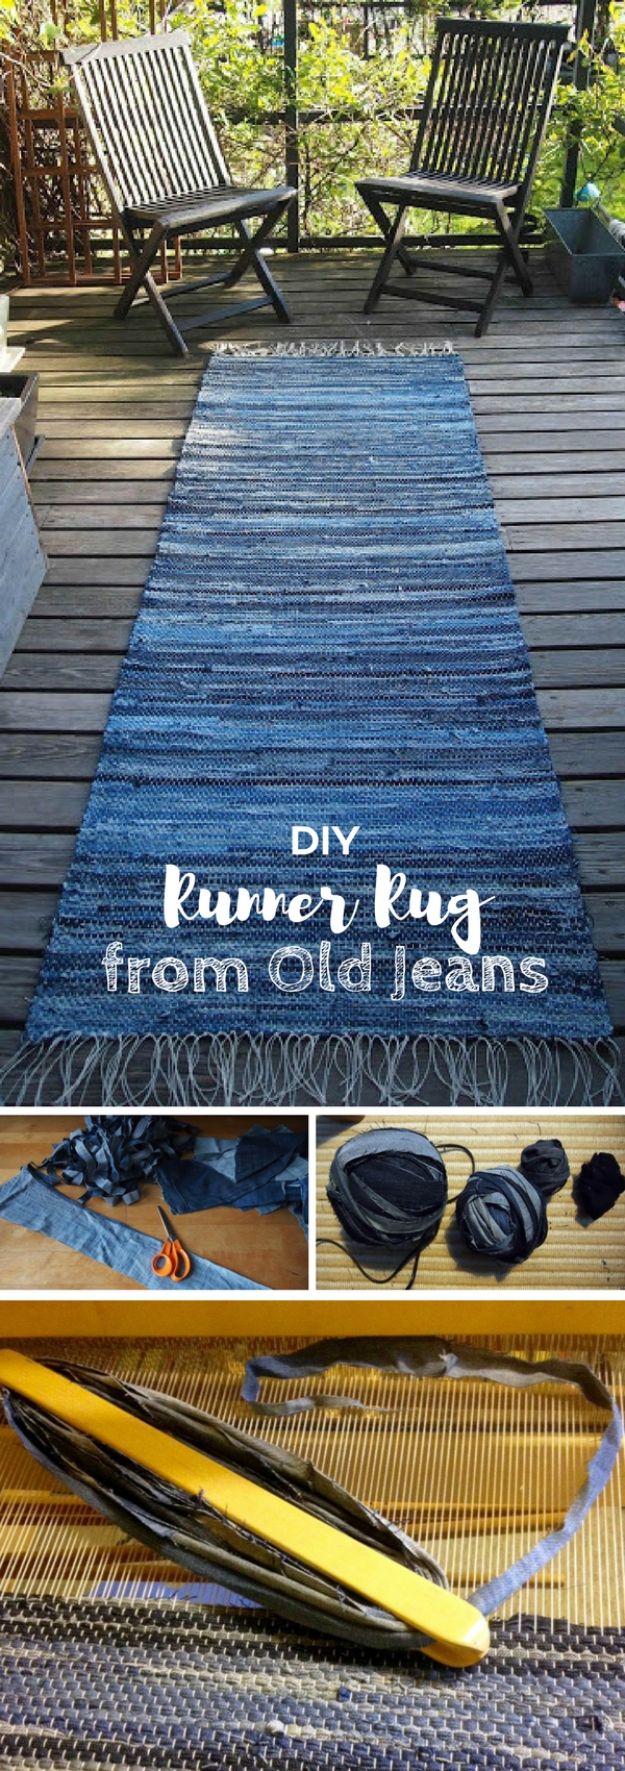 DIY Rugs - Denim Rug From Old Jeans - Ideas for An Easy Handmade Rug for Living Room, Bedroom, Kitchen Mat and Cheap Area Rugs You Can Make - Stencil Art Tutorial, Painting Tips, Fabric, Yarn, Old Denim Jeans, Rope, Tshirt, Pom Pom, Fur, Crochet, Woven and Outdoor Projects - Large and Small Carpet #diyrugs #diyhomedecor